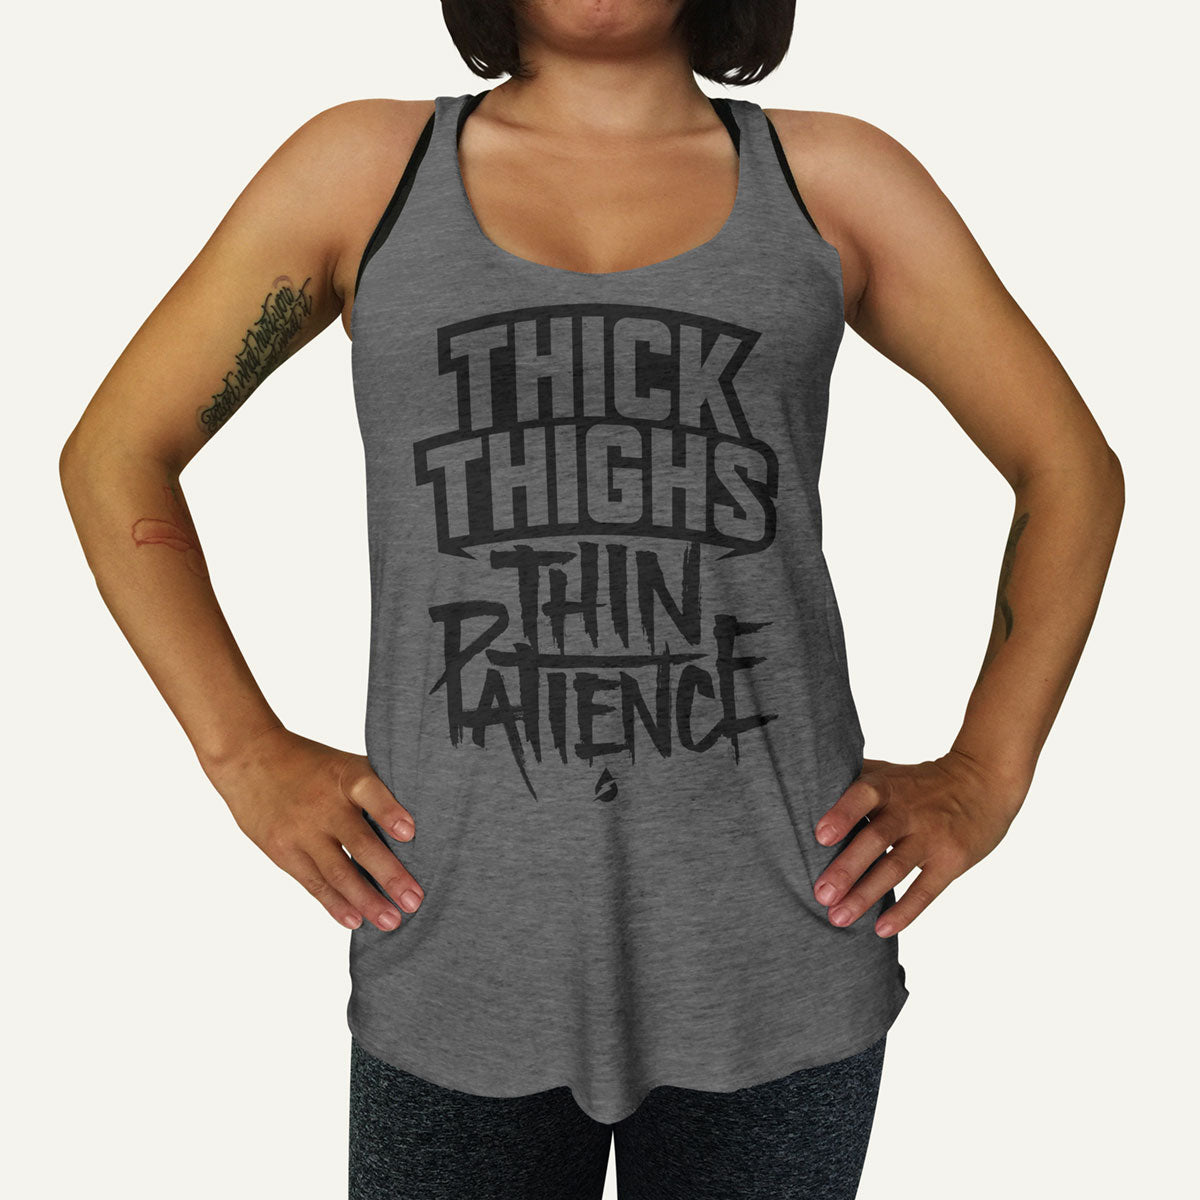 Thick Thighs Thin Patience Women's Tank Top